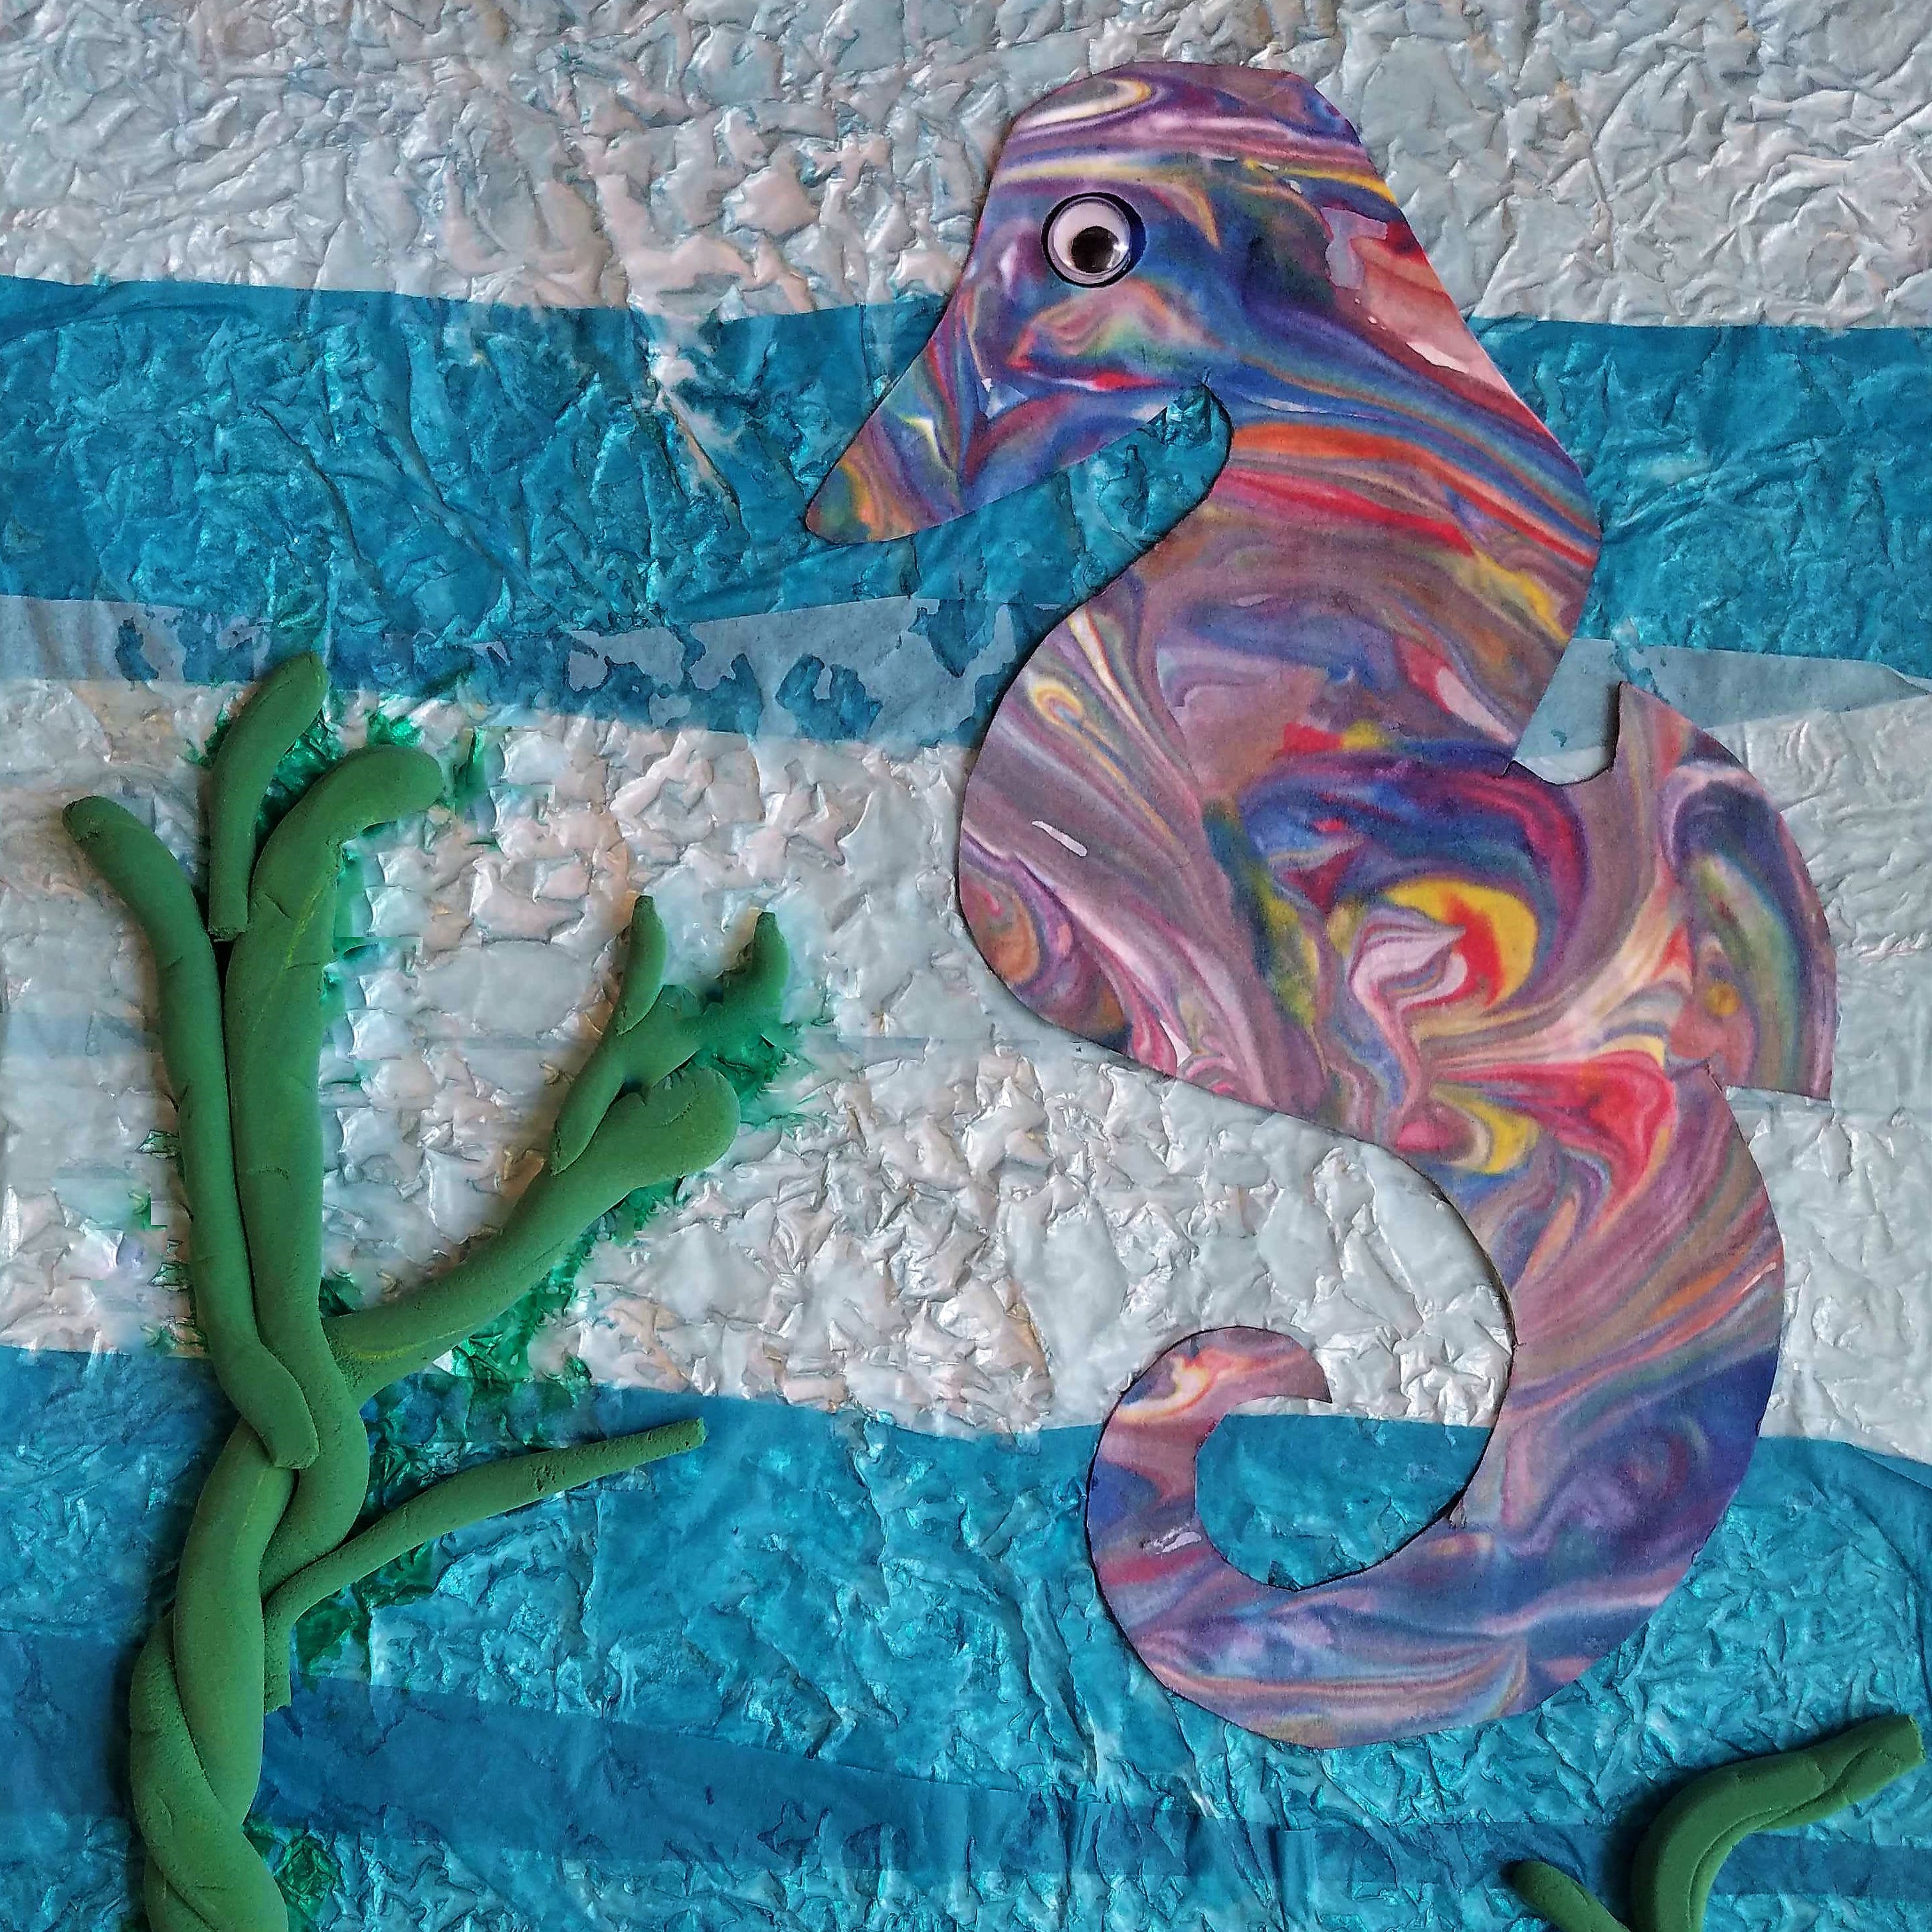 Kidcreate Studio - Chicago Lakeview, Marbleized Seahorse  Art Project